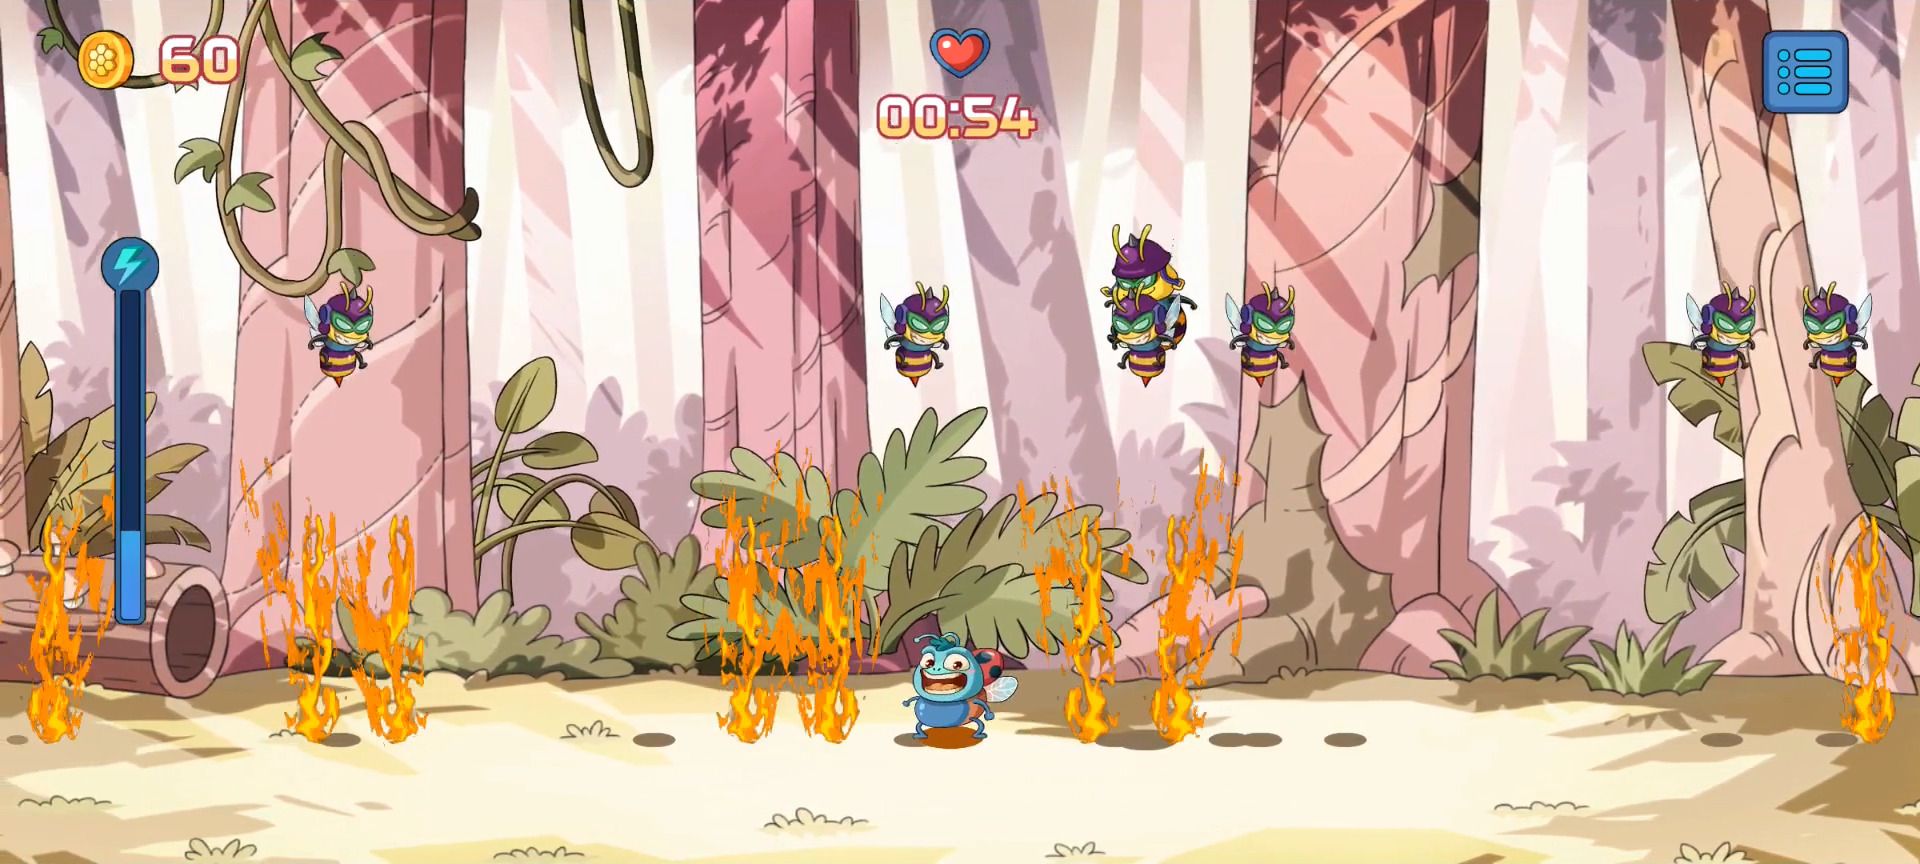 Gameplay of the Bomber Wasp for Android phone or tablet.